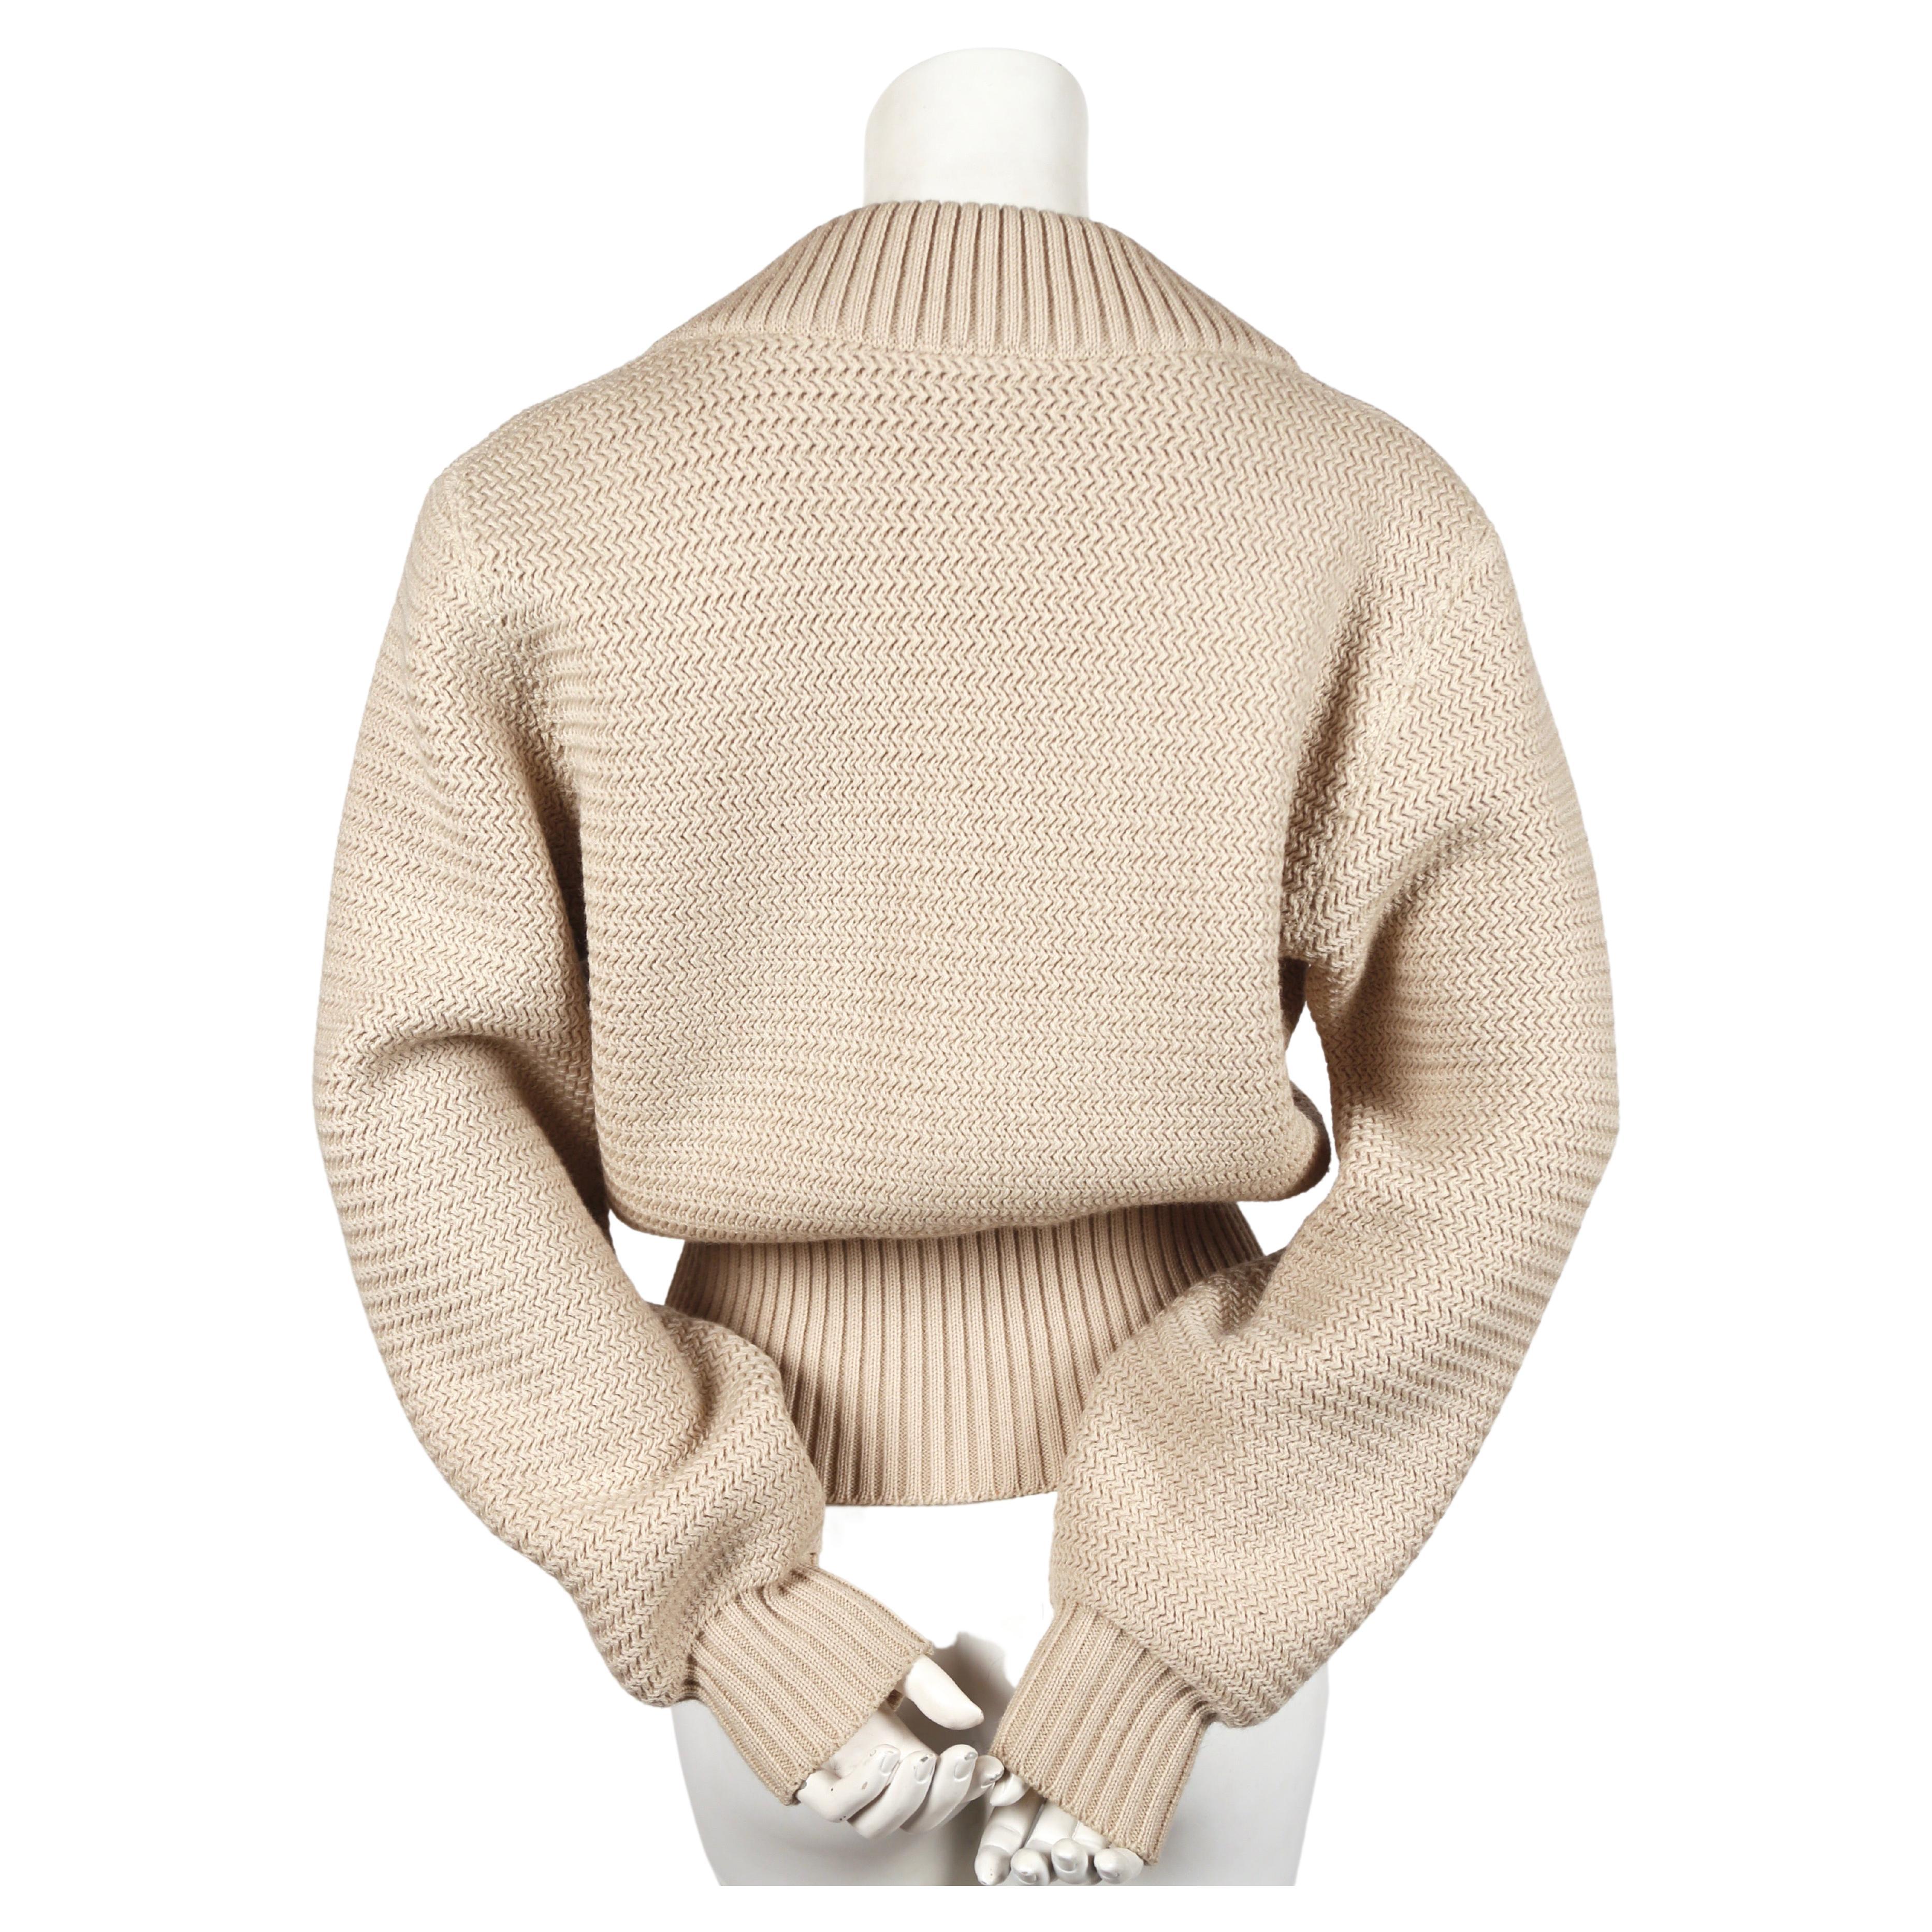 Beige 1985 AZZEDINE ALAIA heavy knit cardigan sweater coat with zippers For Sale